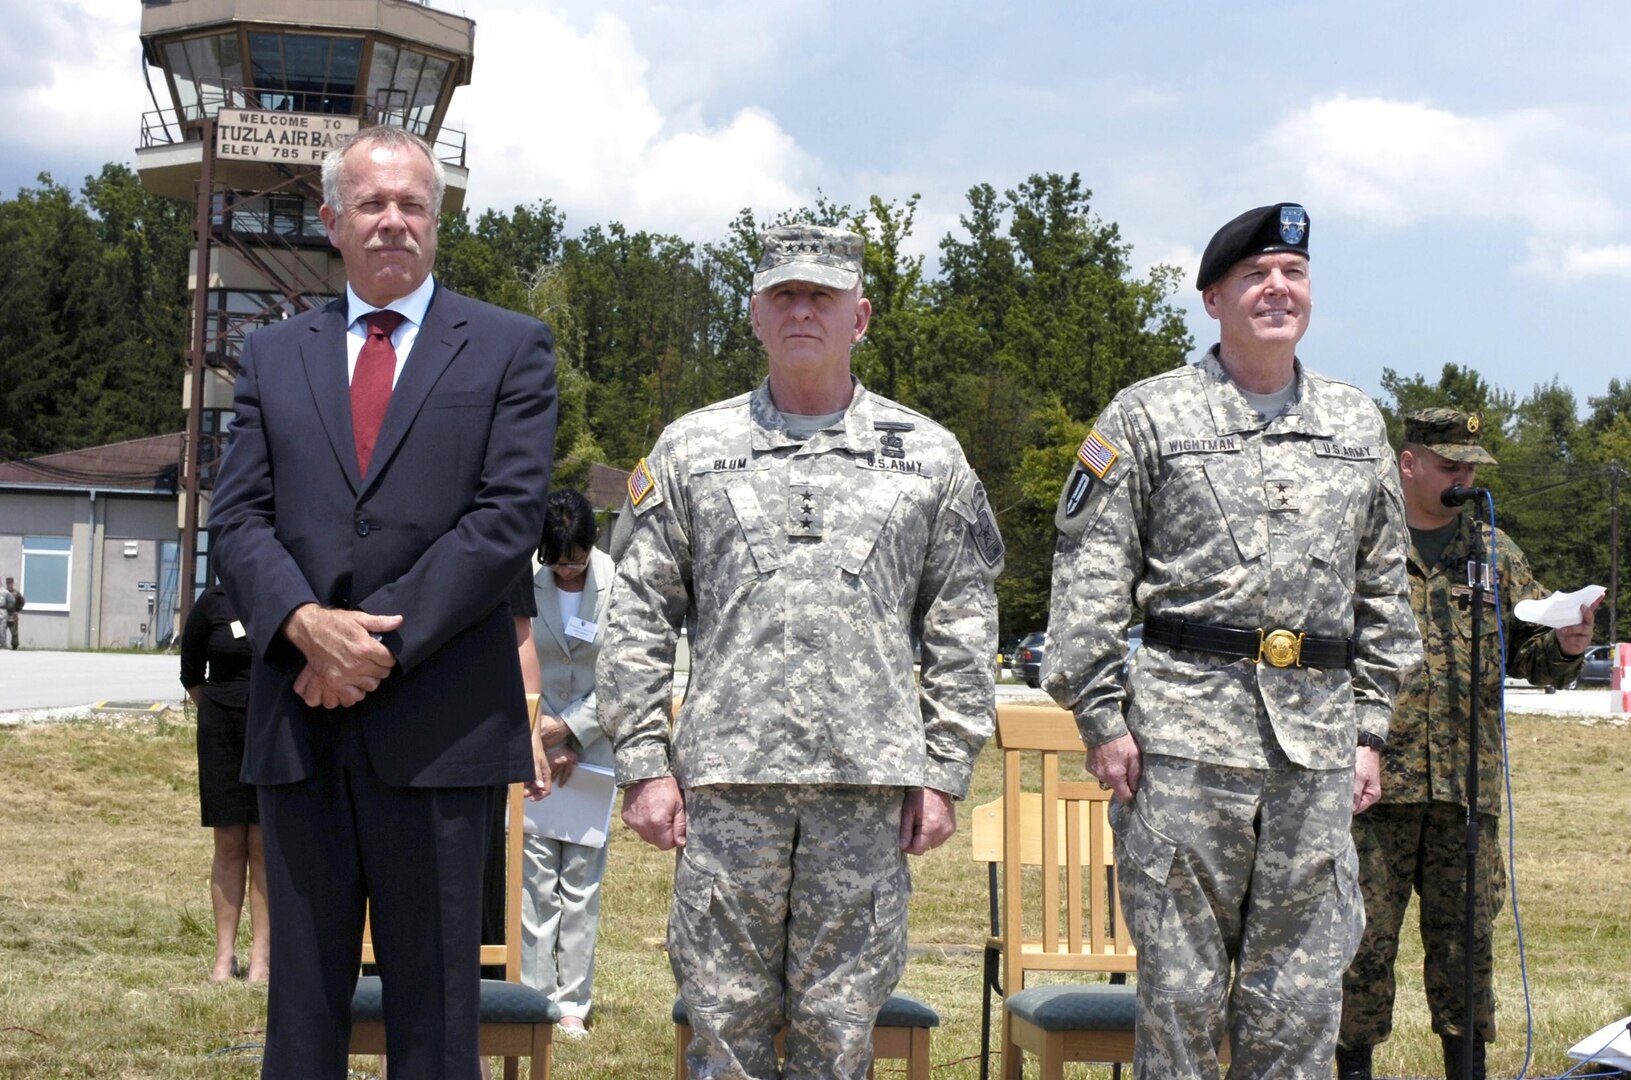 U.S. Ambassador Douglas L. McElhaney; LTG H Steven Blum, the chief of the National Guard Bureau; and Maj. Gen. Richard Wightman Jr., senior military representative at NATO Headquarters in Bosnia and Herzegovina honor arriving officials from Bosnia-Herzegovina during ceremonies marking the turnover of Eagle Base, near Tuzla, in Bosnia-Herzegovina, from the United States to the government of Bosnia-Herzegovina on June 30, 2007. More than 100,000 members of the active duty and Reserve components of the U.S. military have served at Eagle Base since it opened 12 years ago.